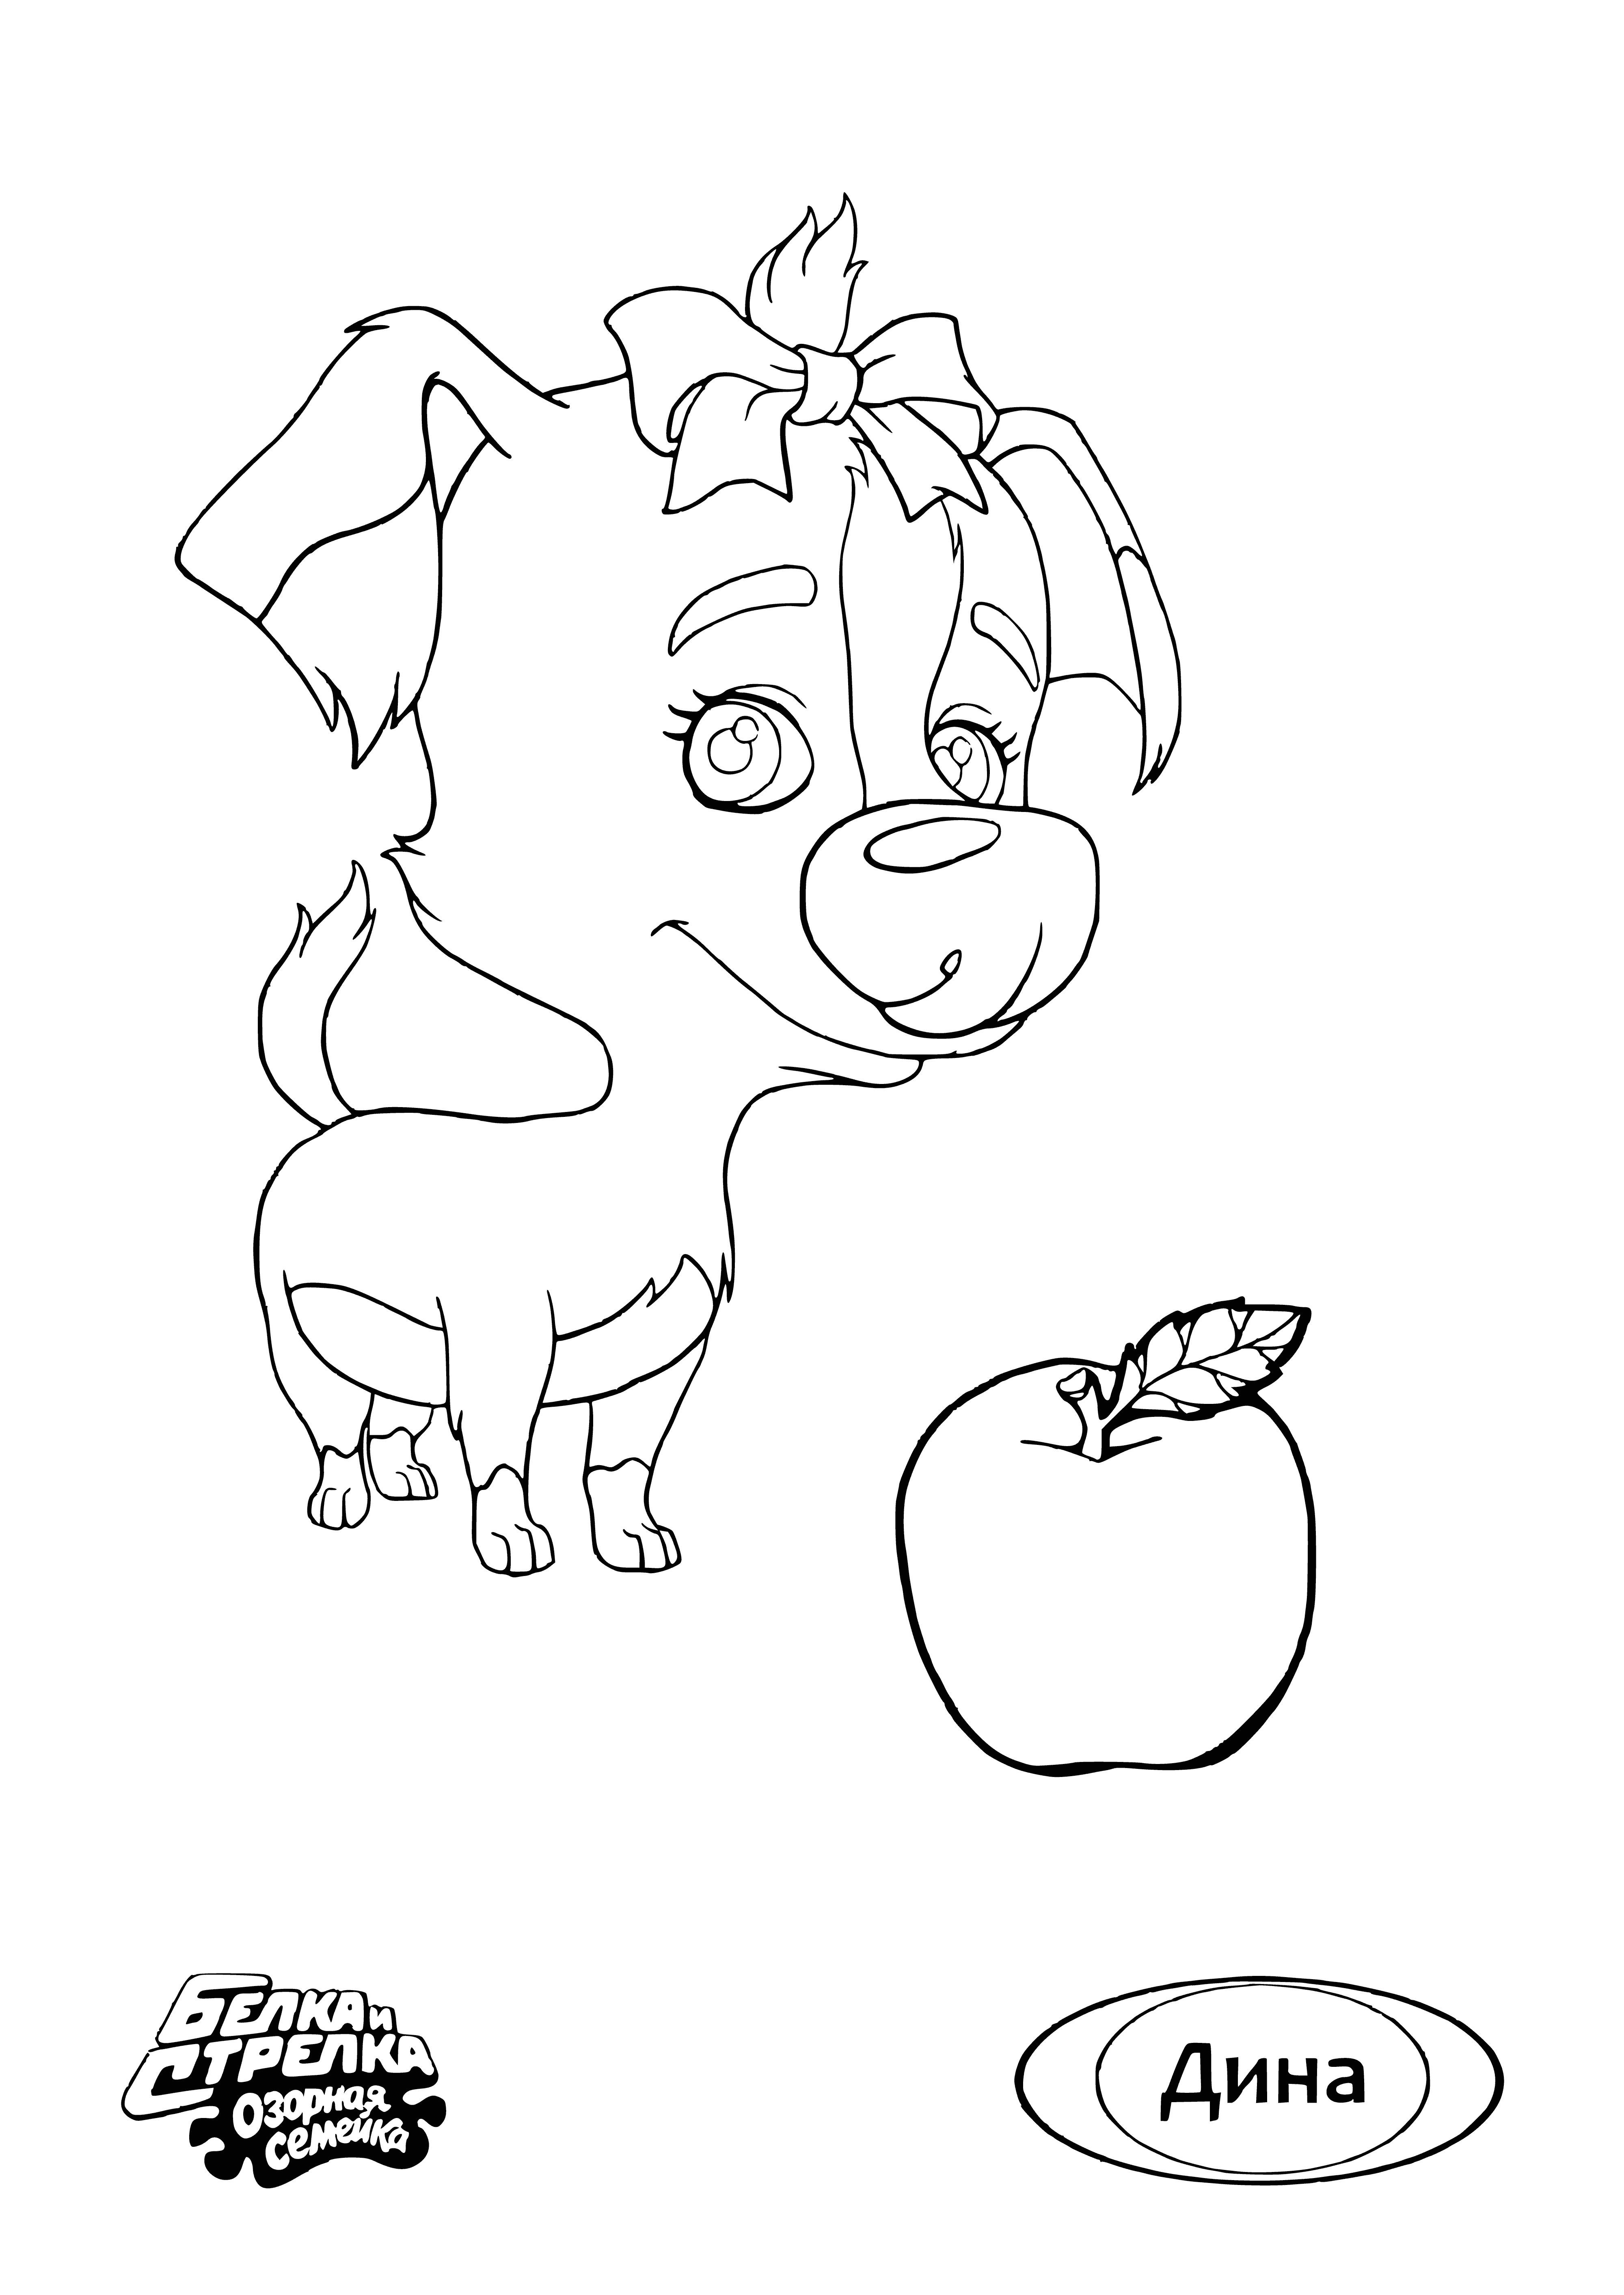 coloring page: A dog & cat sitting on a couch, with the dog holding an apple in its mouth. The cat looks mischievous. Seems like they're having a fun time!